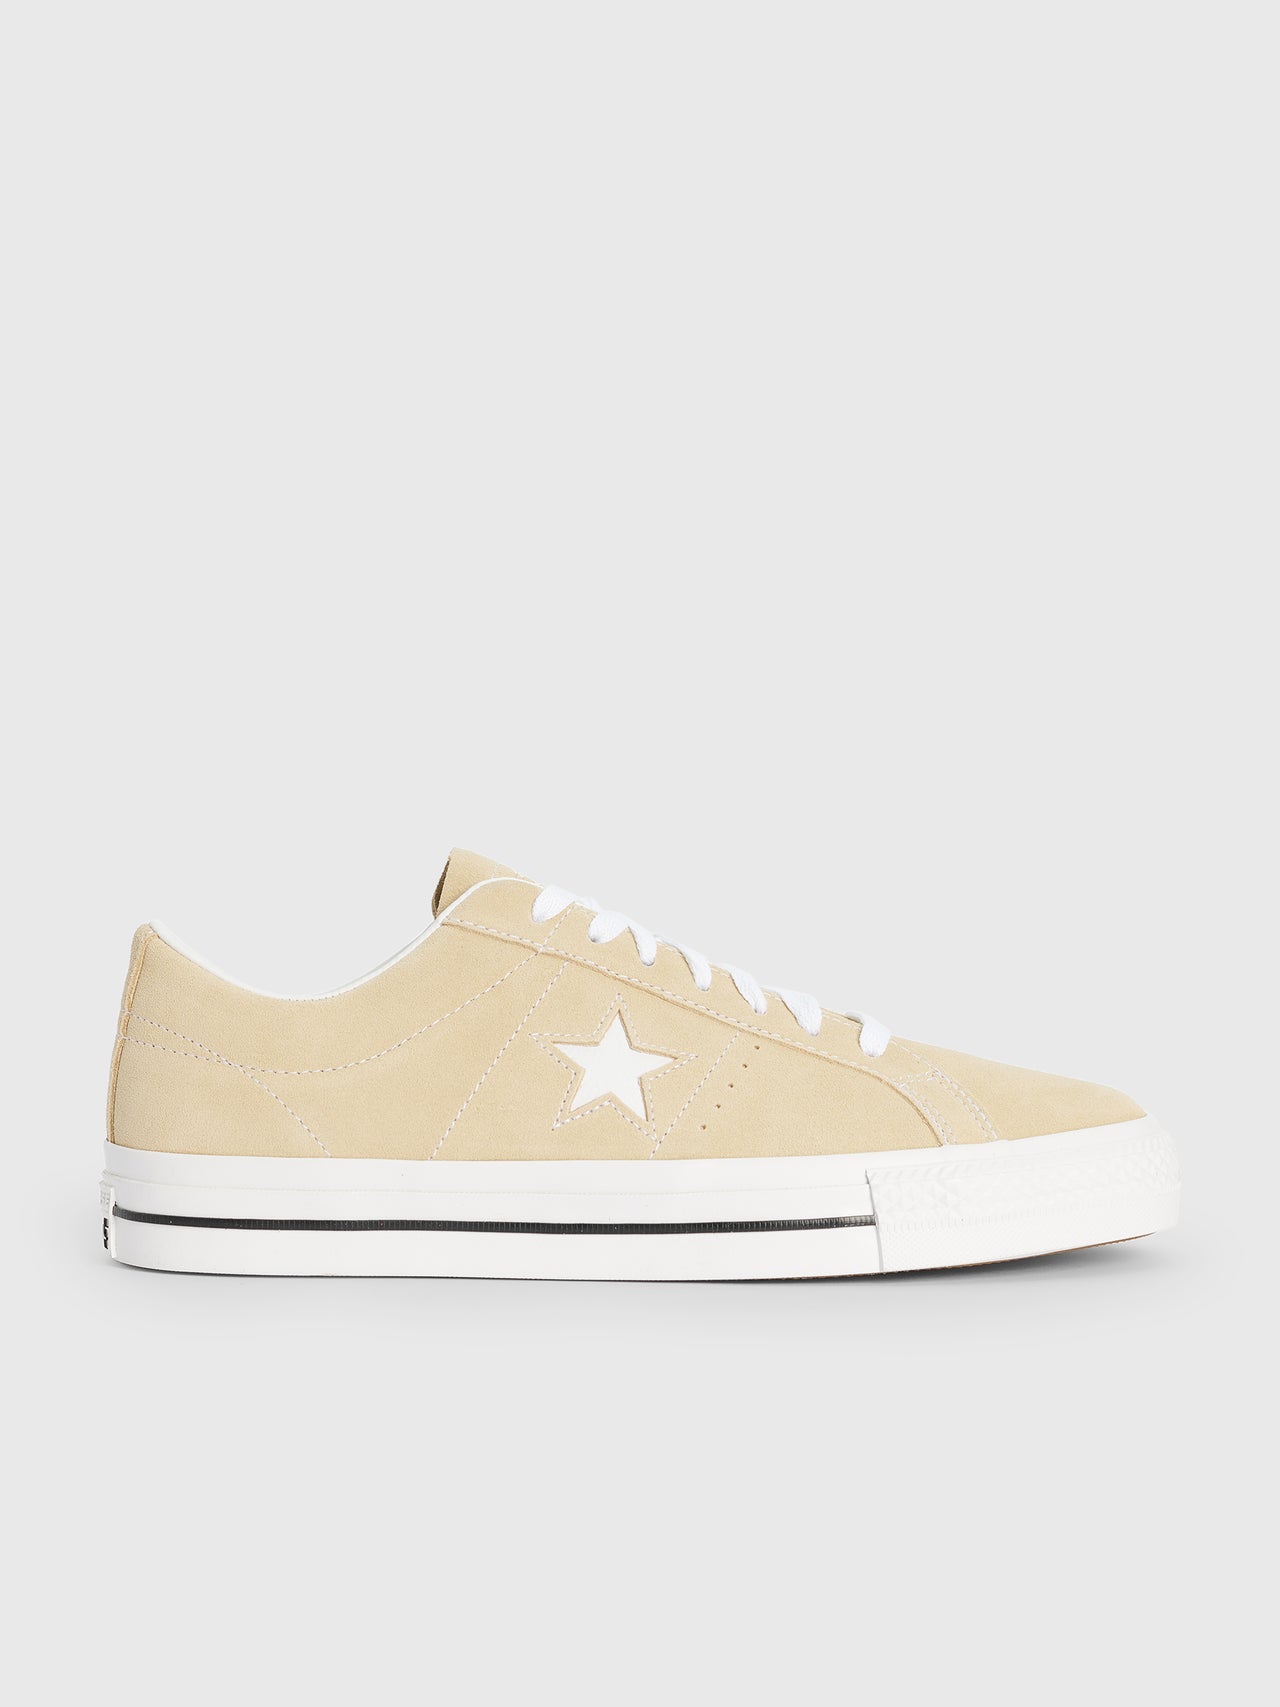 Converse Cons One Star Pro OX Oat Milk